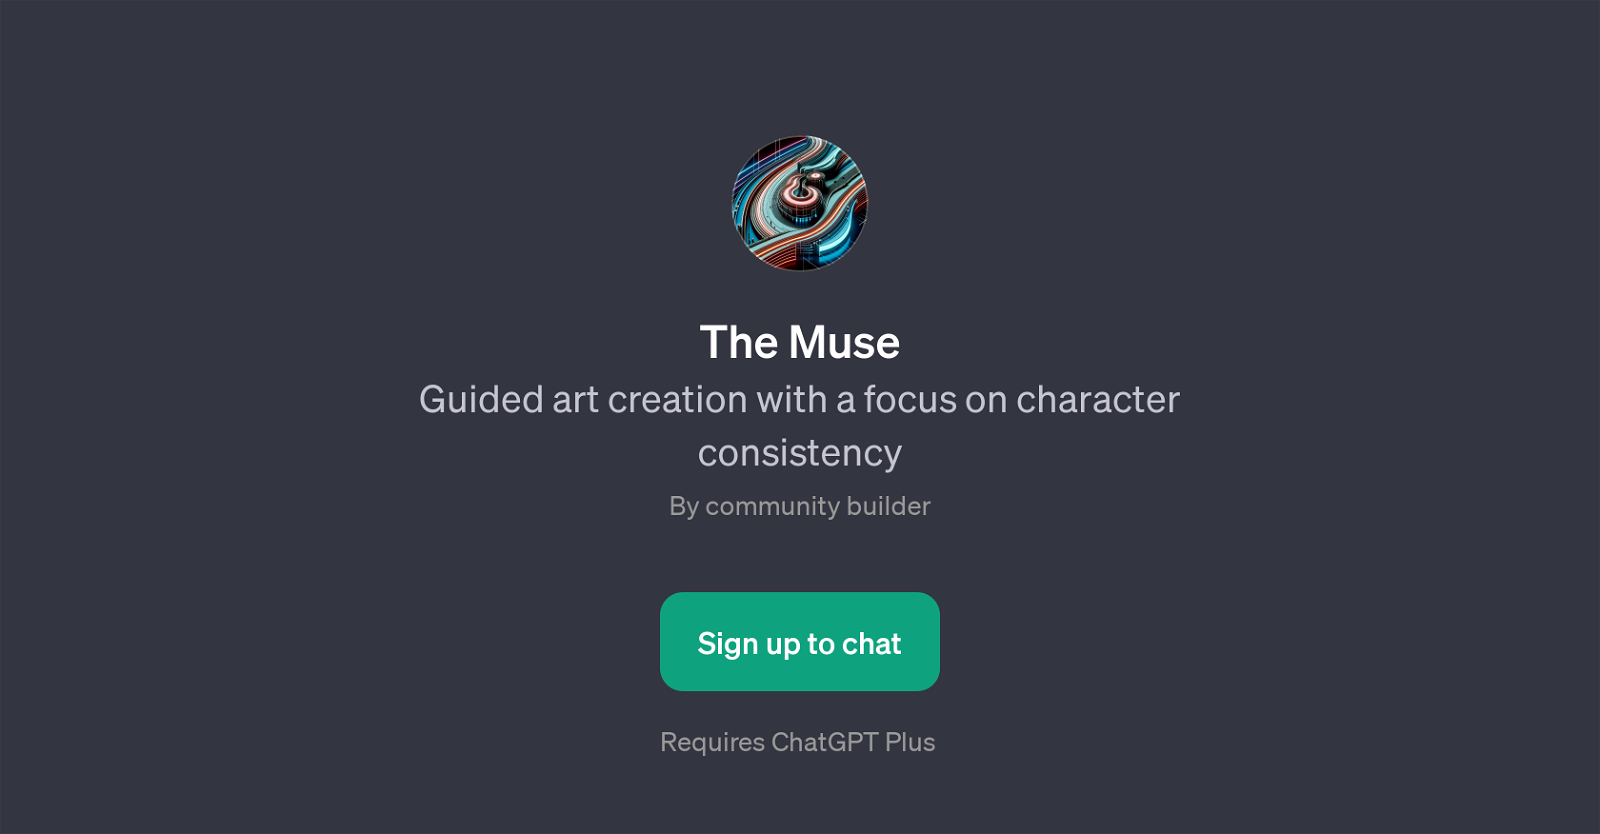 The Muse website